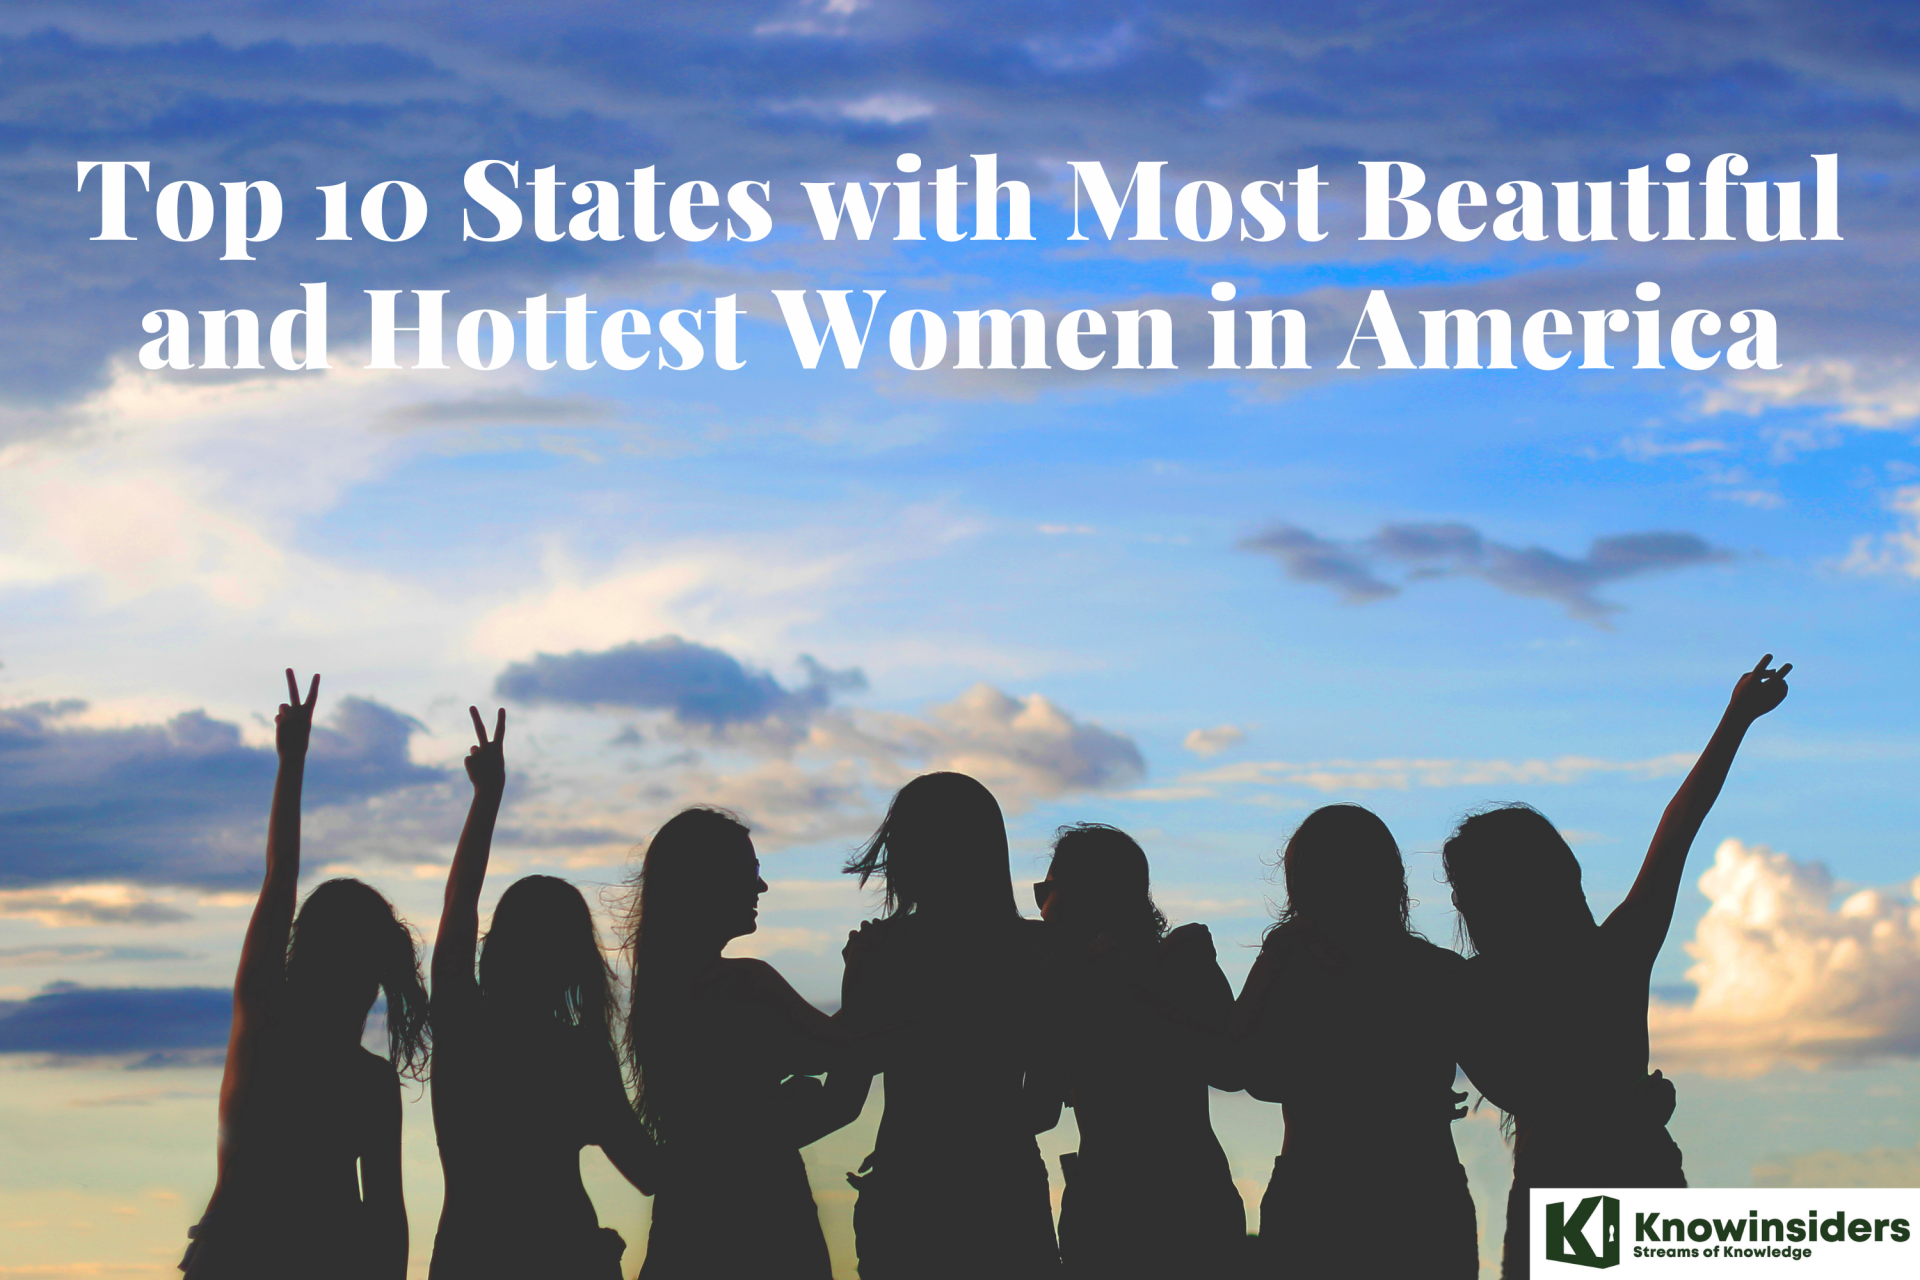 Top 10 States with Most Beautiful and Hottest Women in America